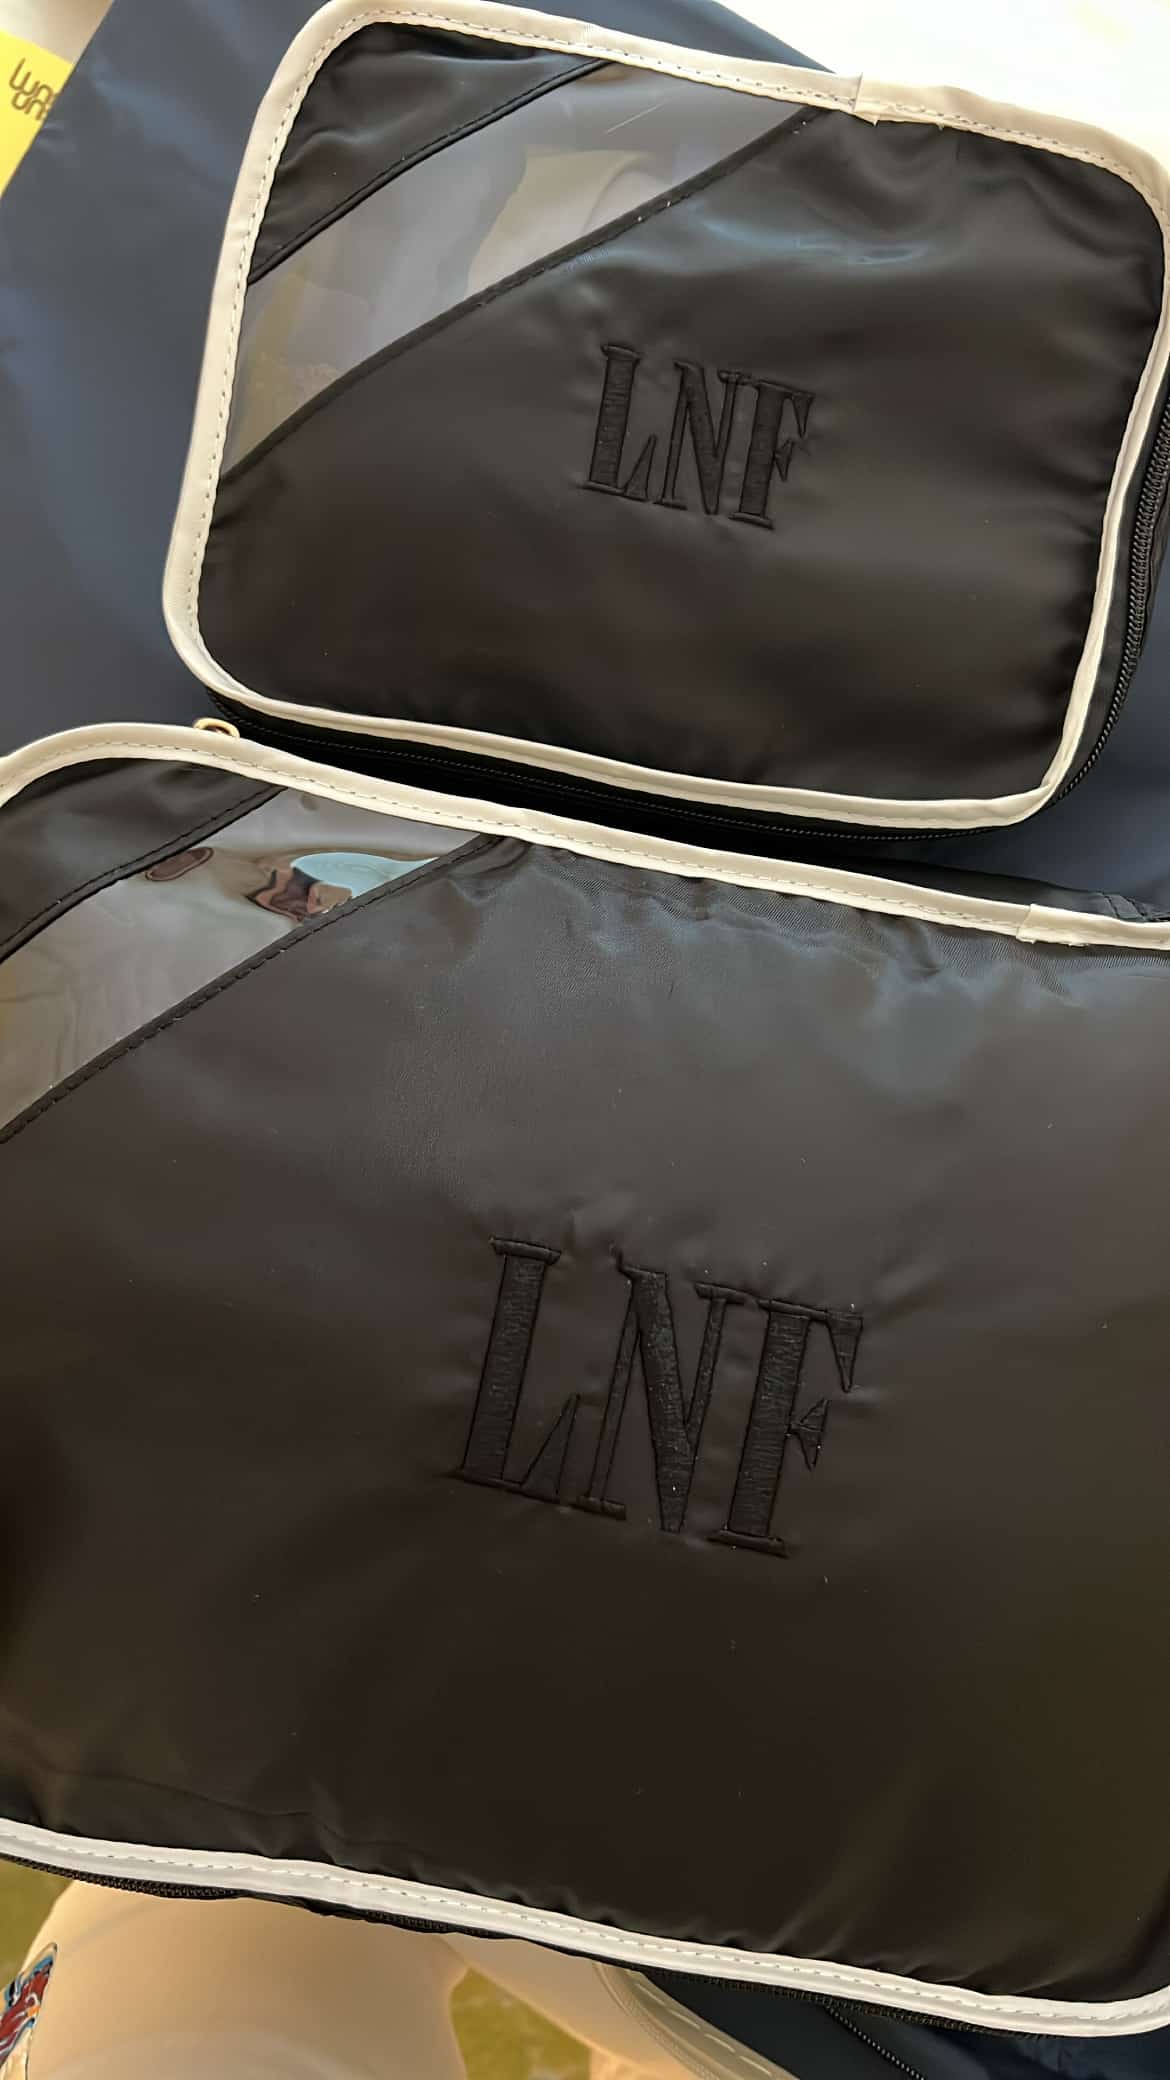 paravel packing cubes in black with black embroidery